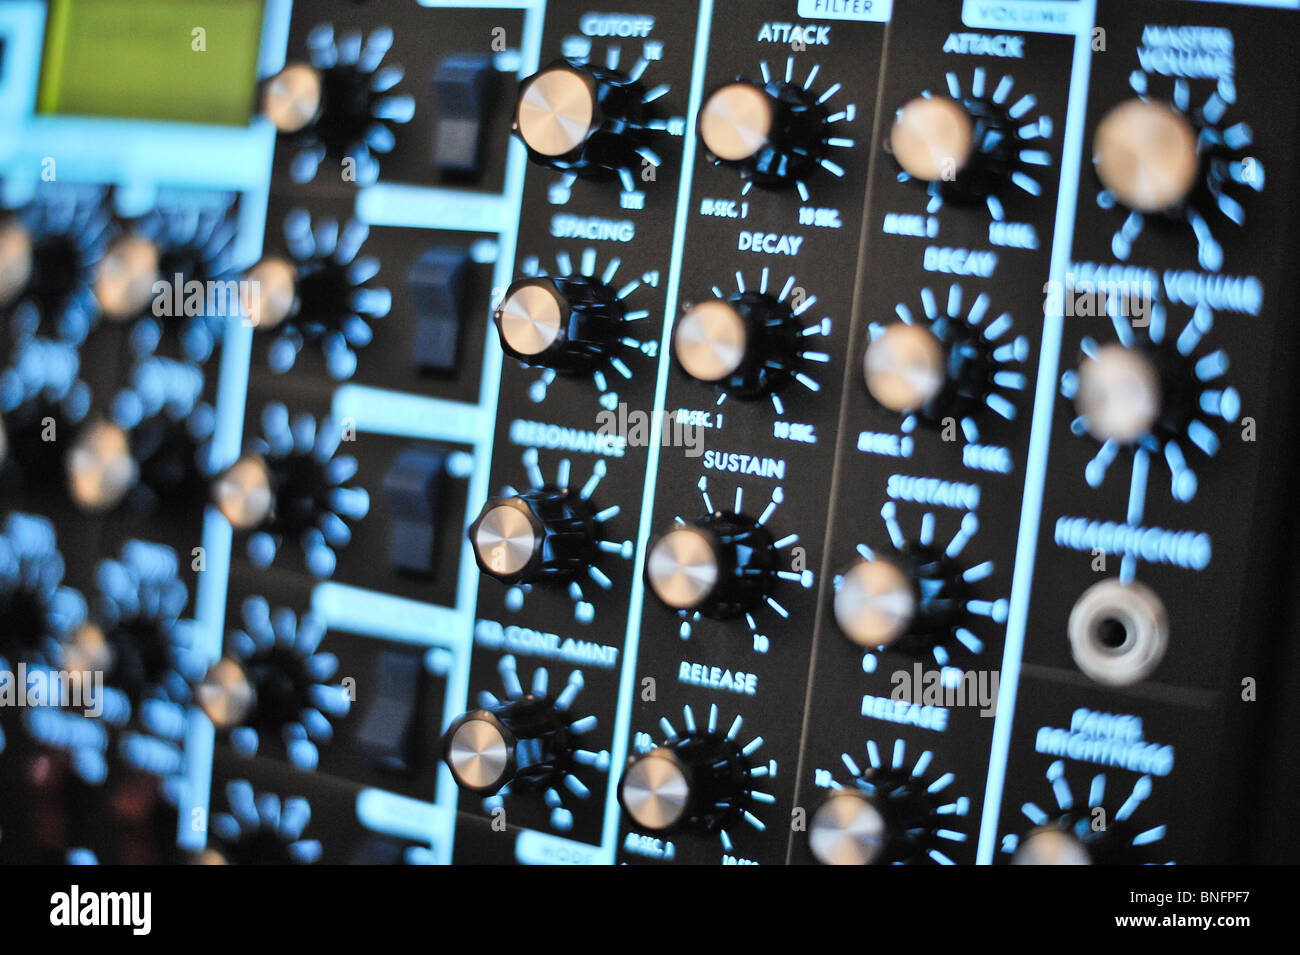 Angled photo of a Moog Synthesizer with blurred foreground and background.  Knobs, switches and blue backlit control panel. Stock Photo